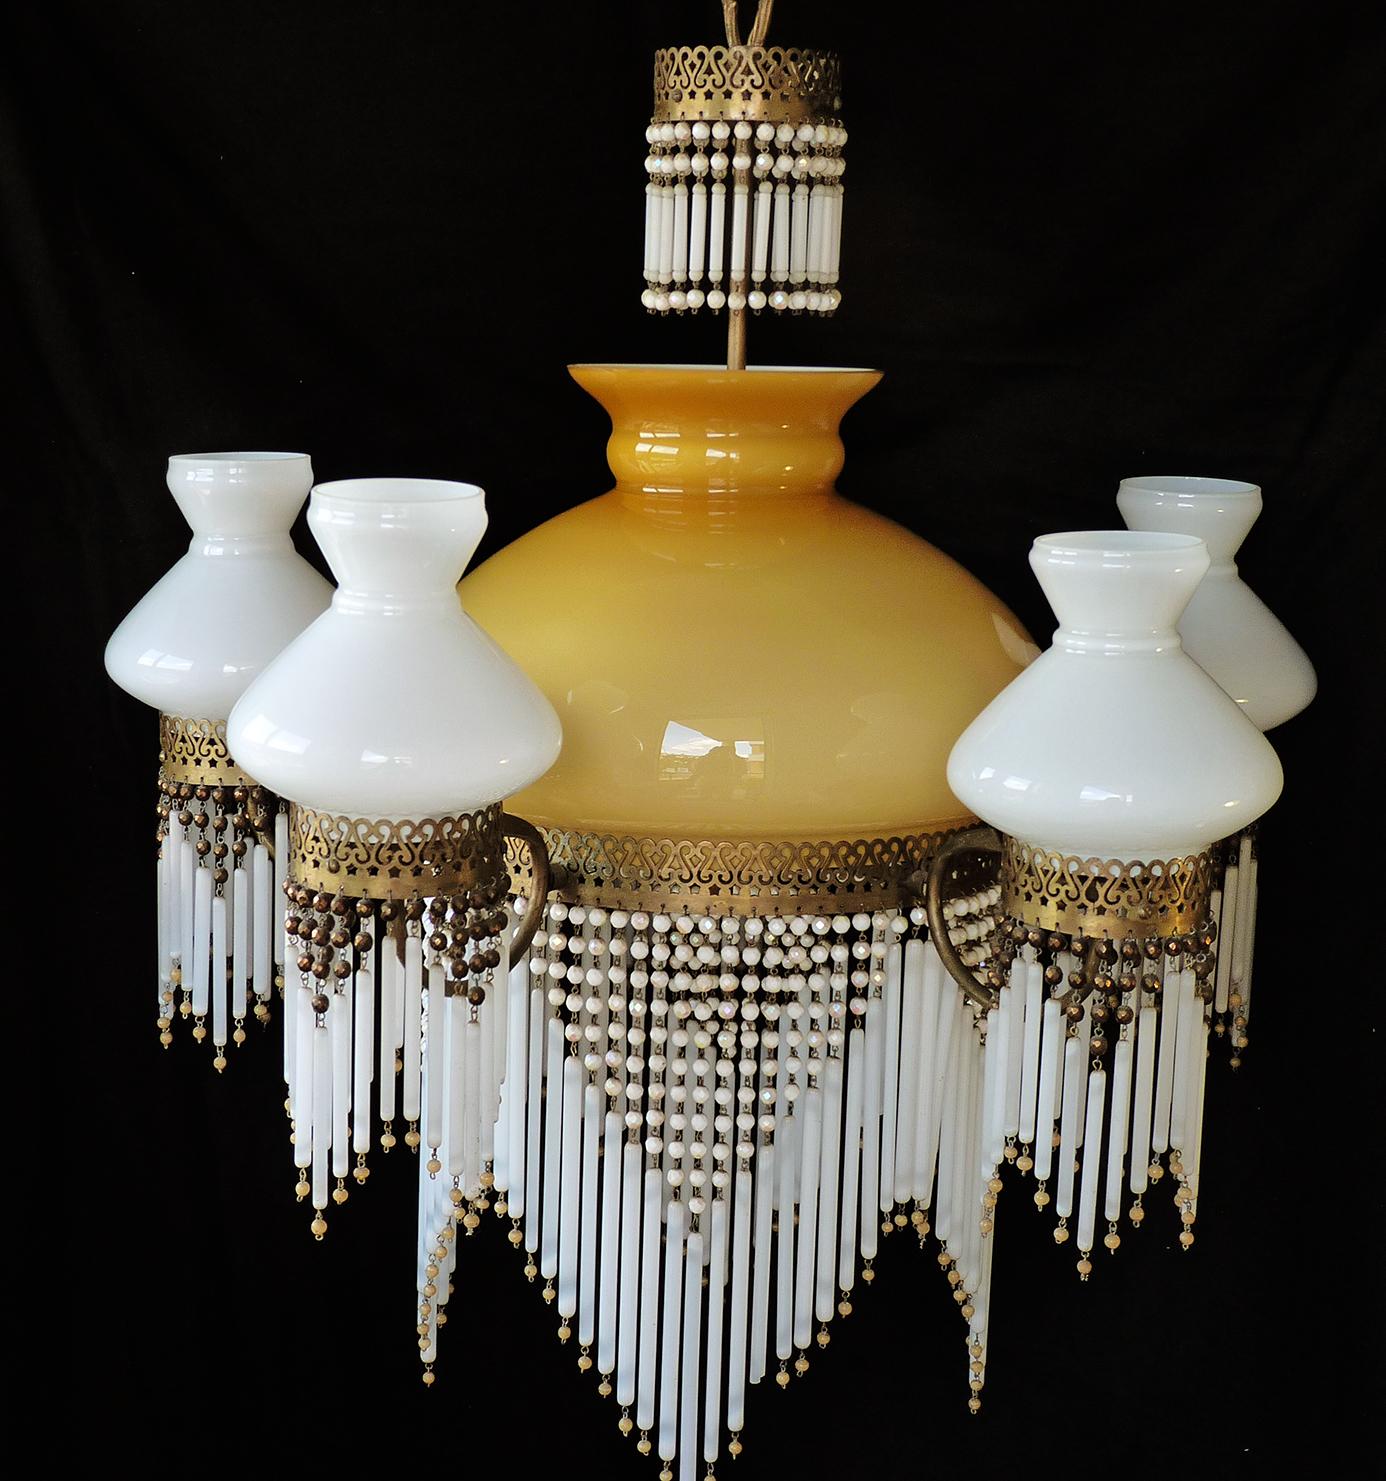 Gorgeous large antique French chandelier in amber opaline cased glass and white straws Art Deco or Art Nouveau
Pressed metal and hundreds of glass straw tubes adorned with beads on the end of each tube, 1930s
Measures:
Diameter 26 in / 65 cm
Height